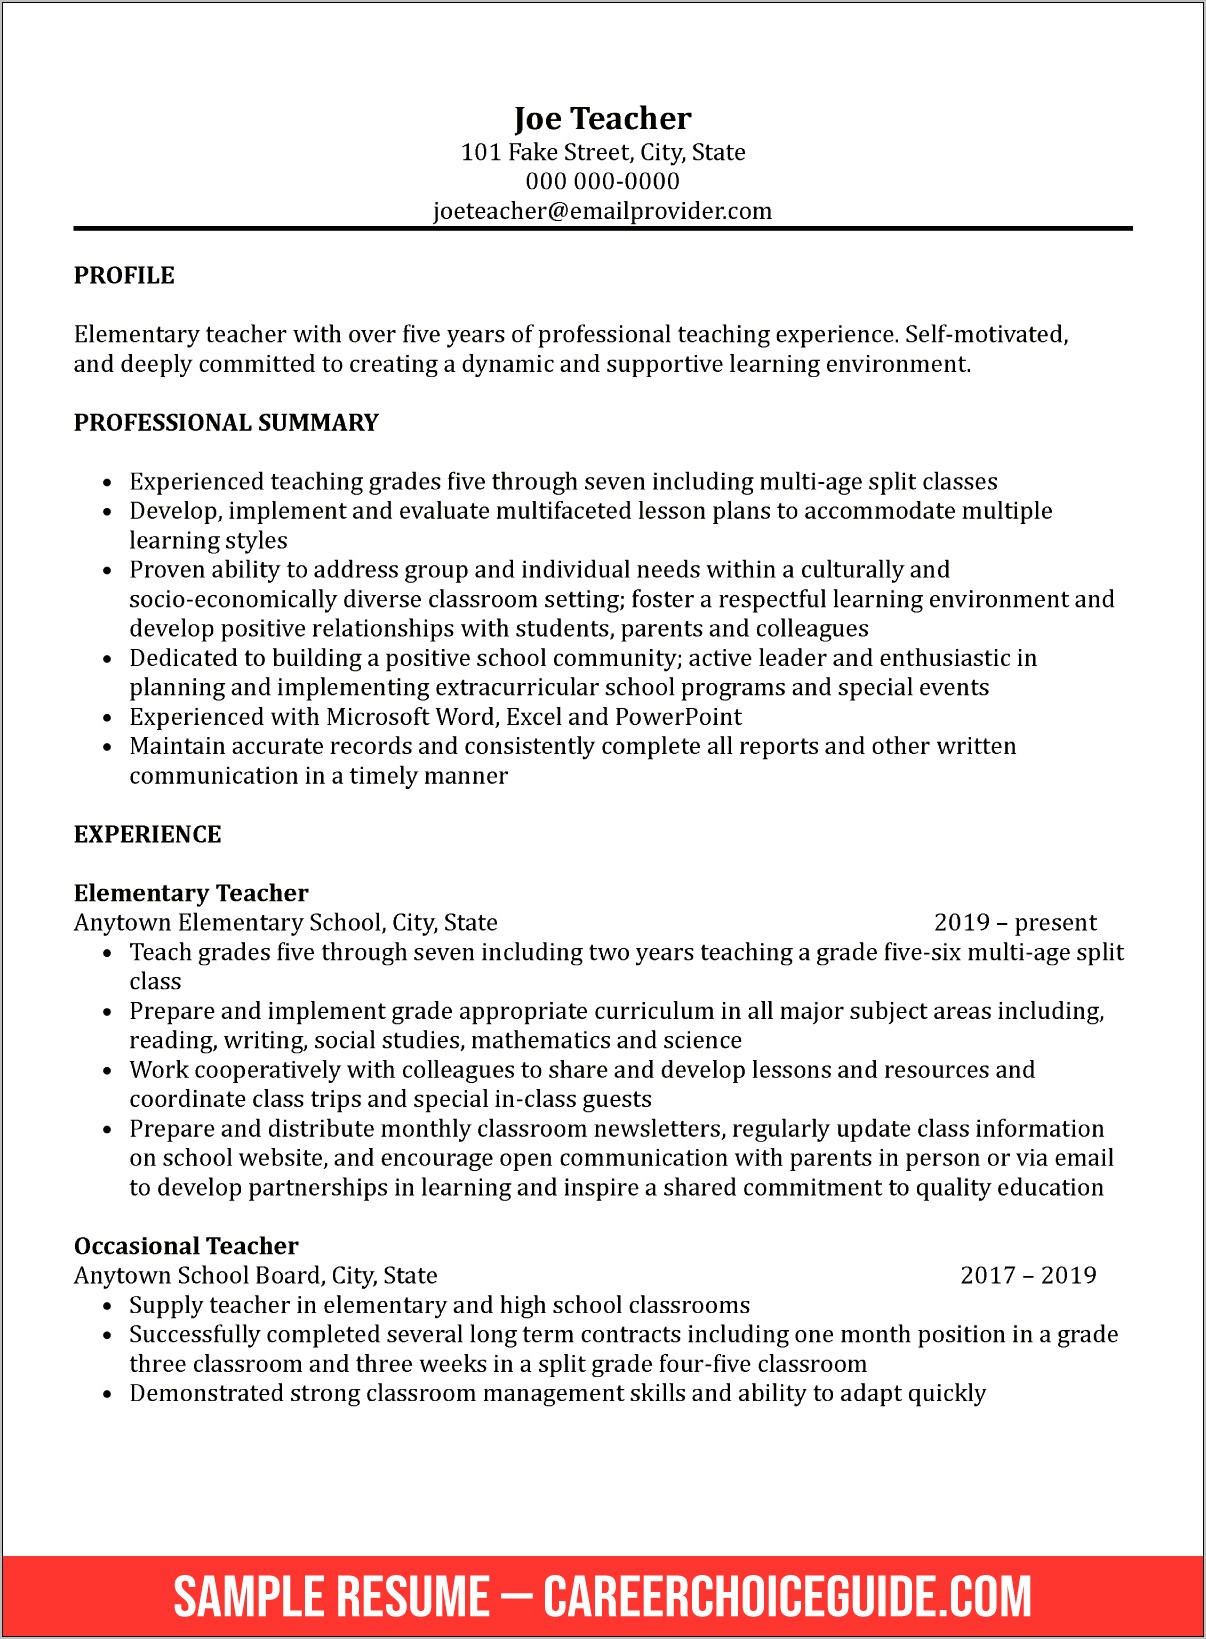 Sample Of Resume With Lines